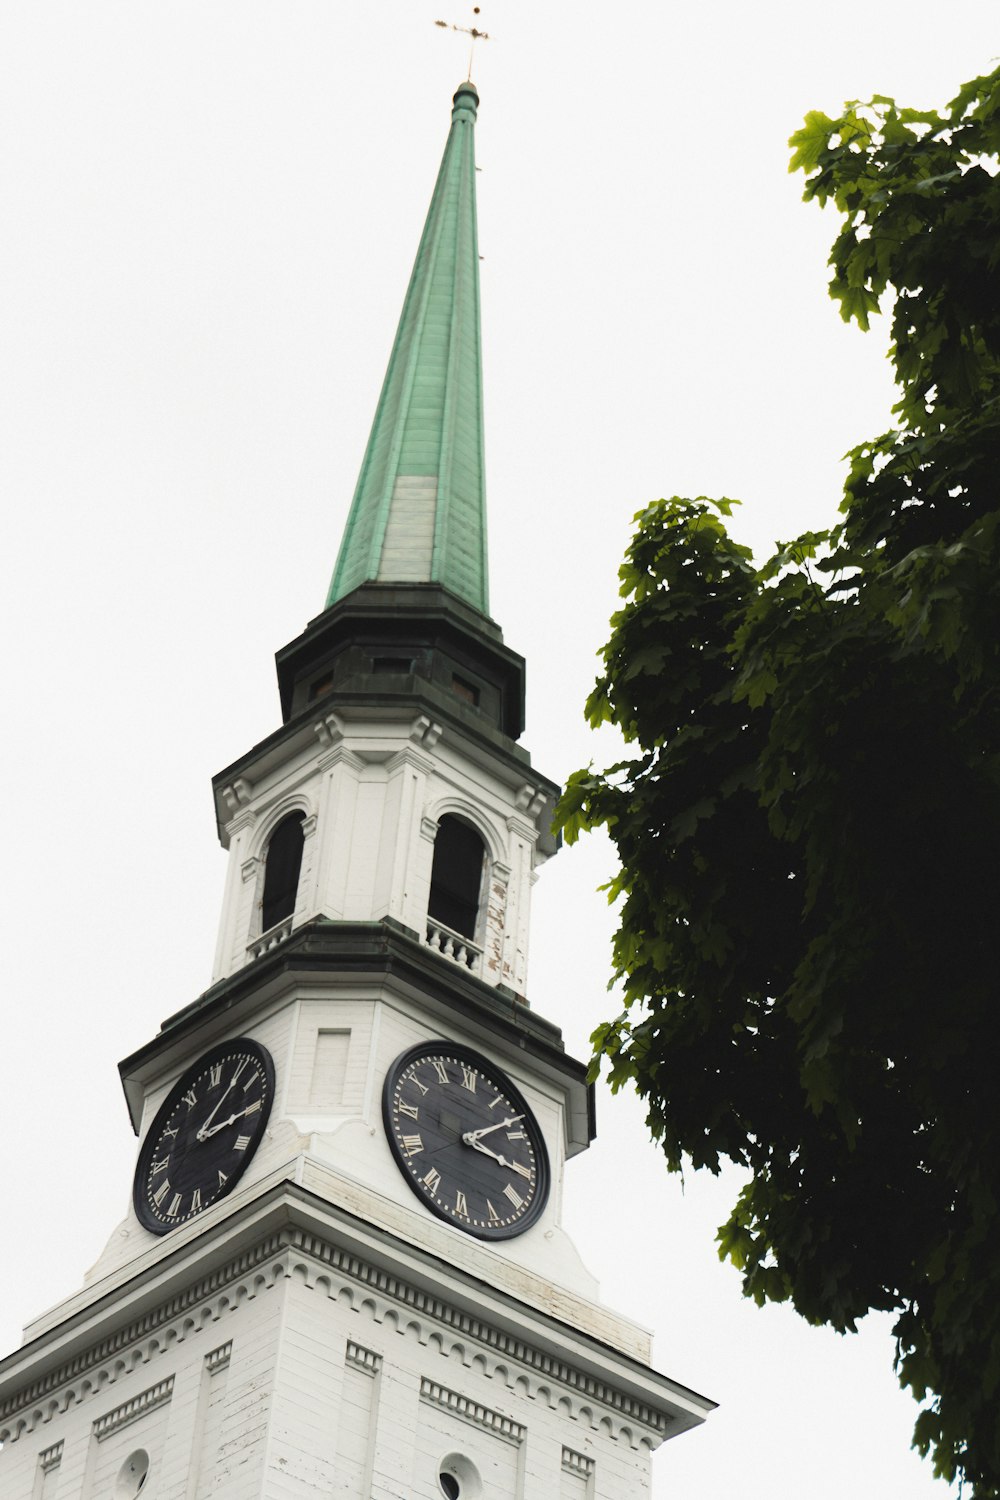 a white clock tower with a green steeple